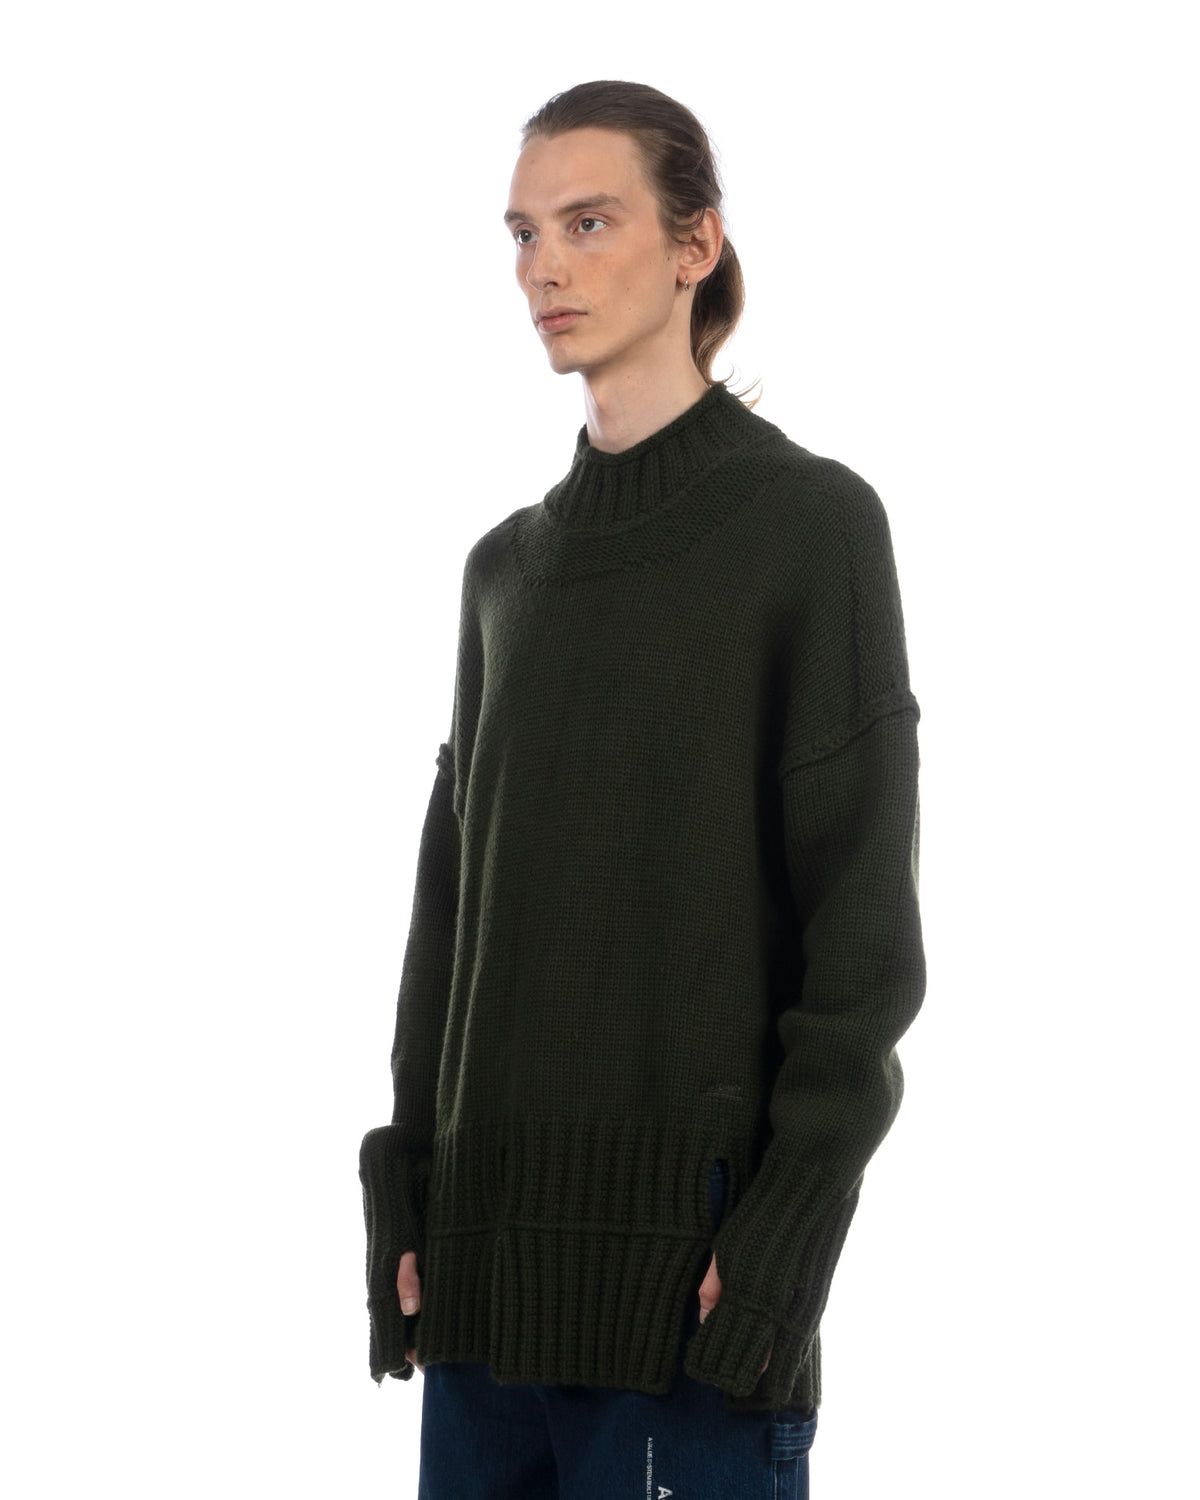 A-COLD-WALL* | Textured Mock Neck Knit Dark Pine Green - Concrete